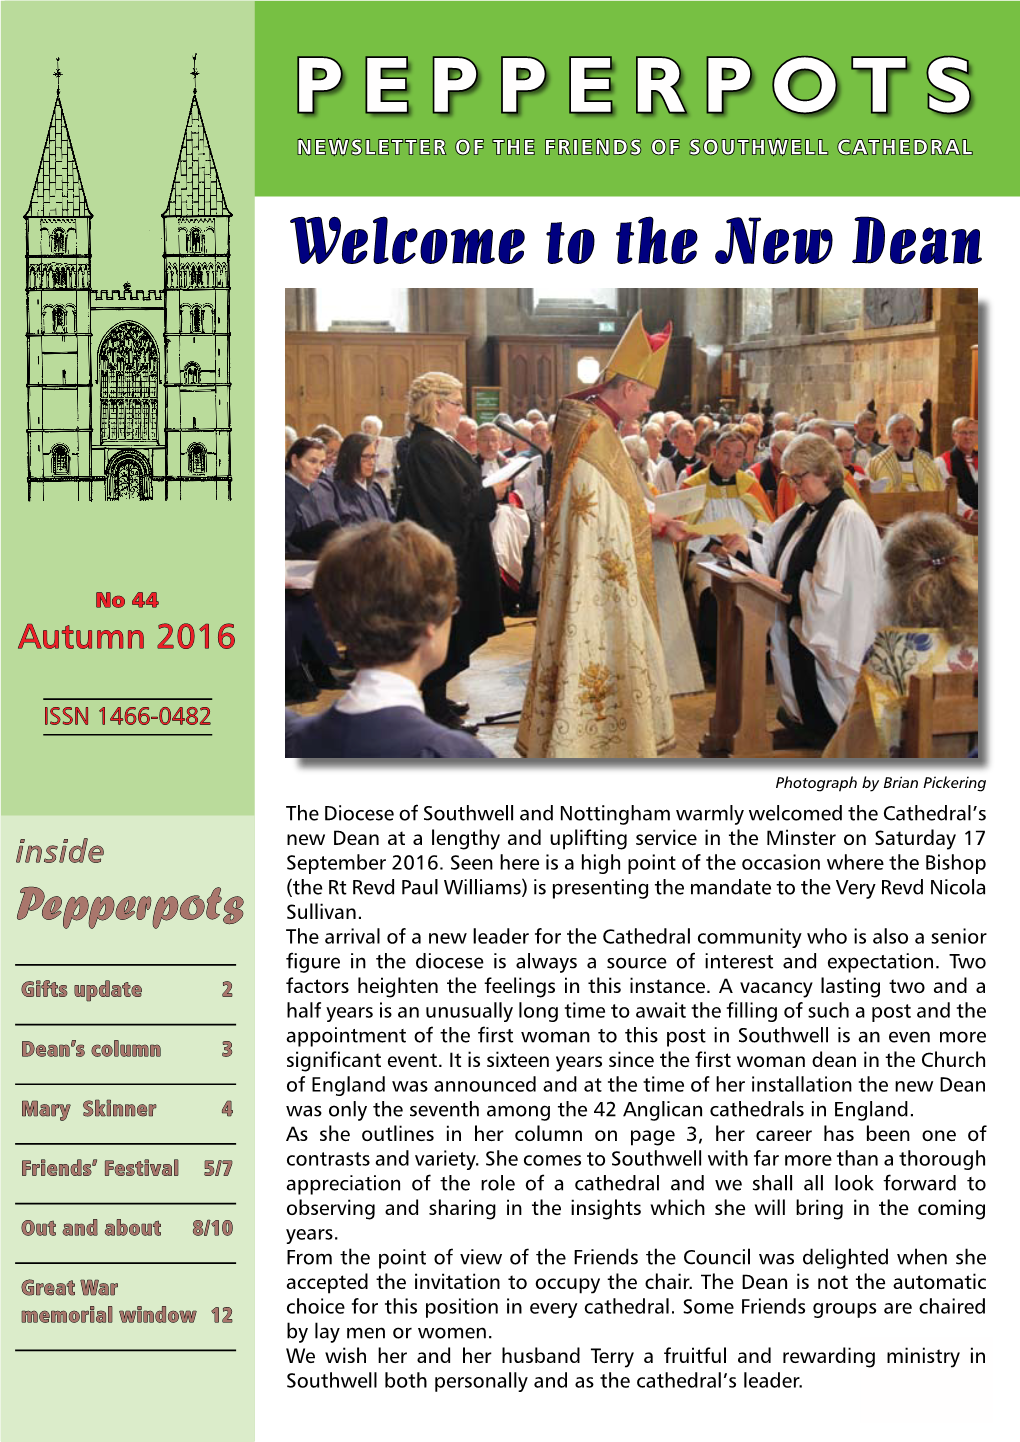 Pepperpots NEWSLETTER of the FRIENDS of SOUTHWELL CATHEDRAL Welcome to the New Dean